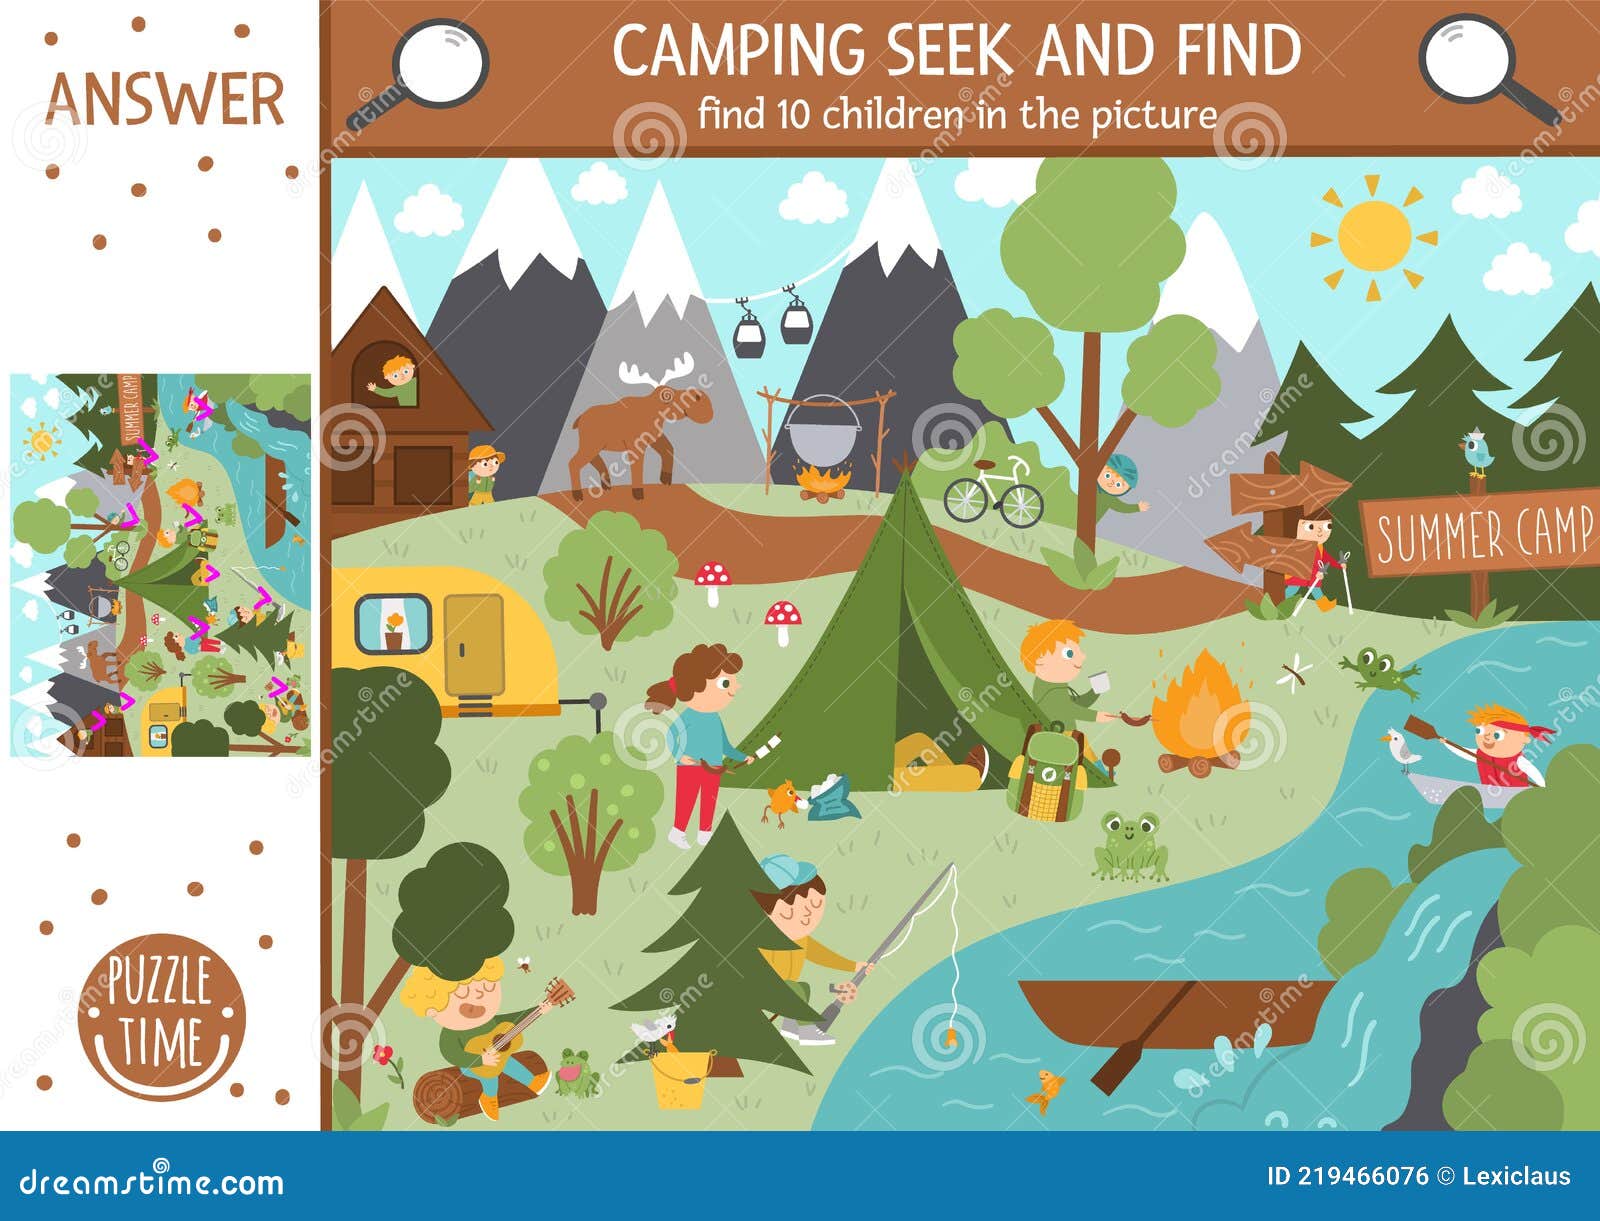  camping searching game with cute children in the forest. spot hidden kids in the picture. simple seek and find summer camp